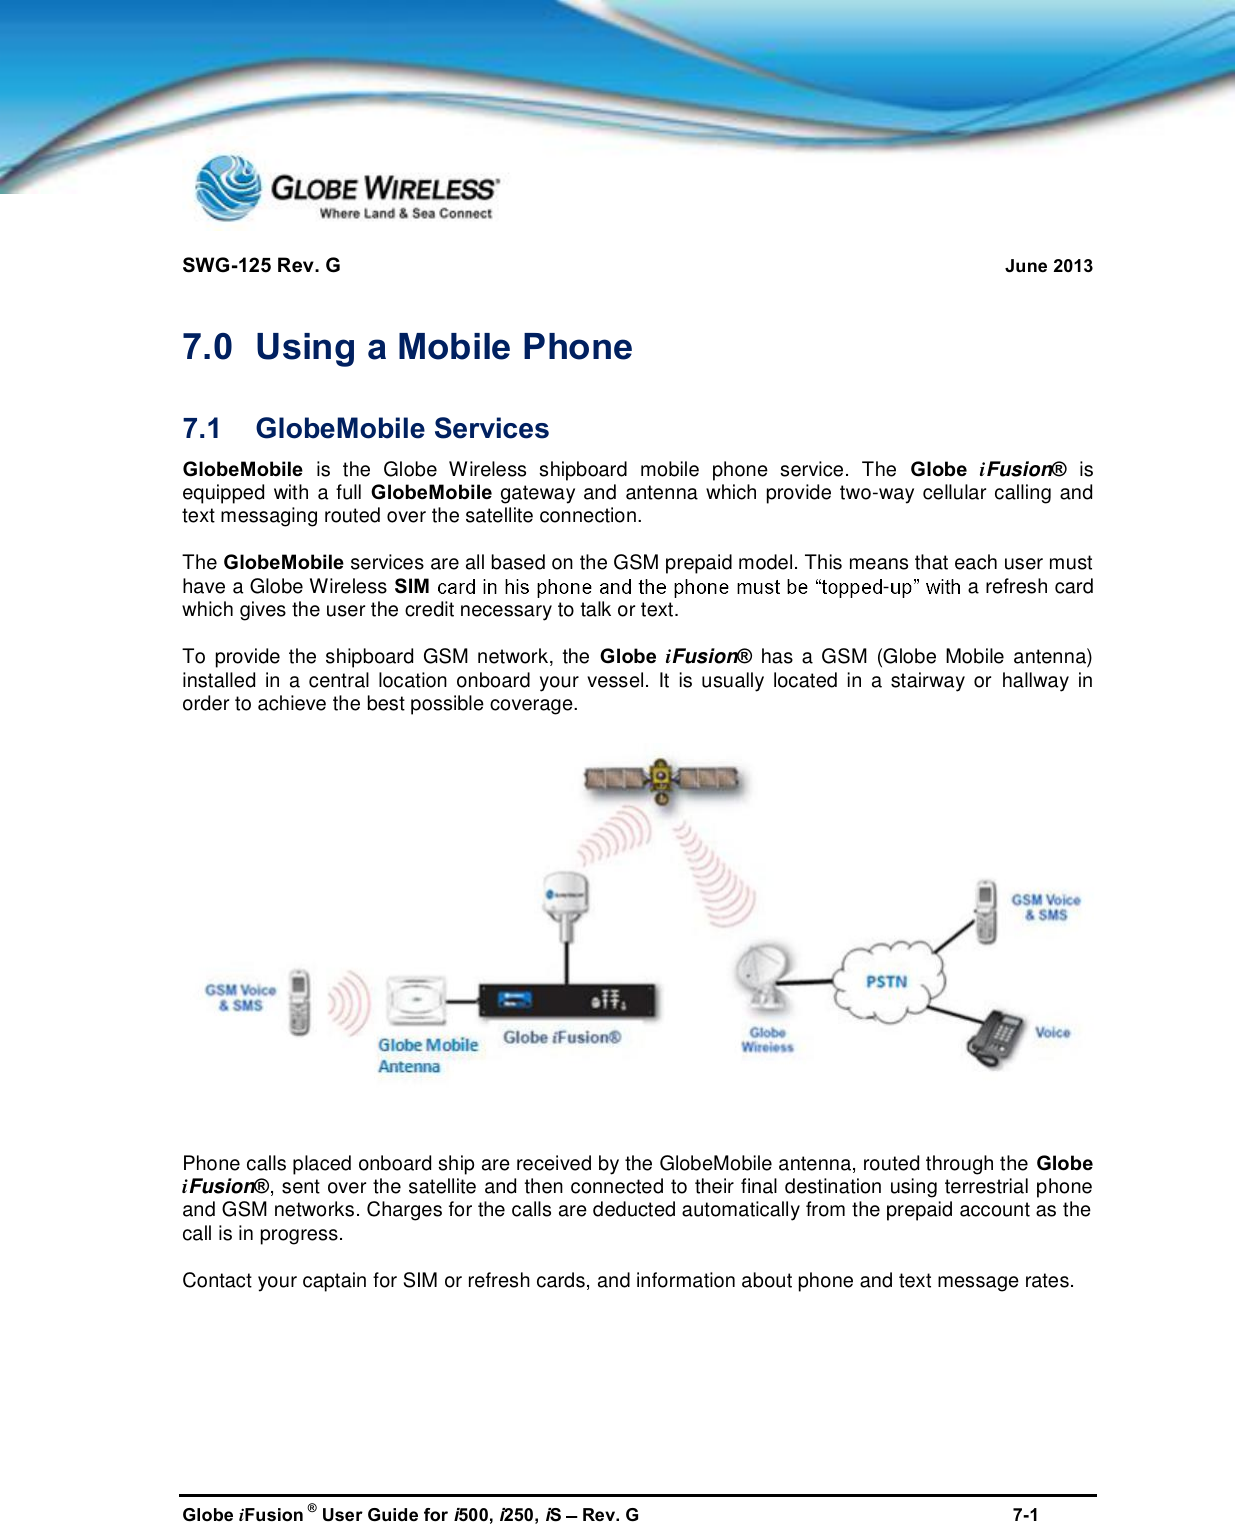 SWG-125 Rev. G June 2013Globe iFusion ®User Guide for i500, i250, iSRev. G 7-17.0 Using a Mobile Phone7.1 GlobeMobile ServicesGlobeMobile is the Globe Wireless shipboard mobile phone service. The Globe iFusion®isequipped with a full GlobeMobile gateway and antenna which provide two-way cellular calling andtext messaging routed over the satellite connection.The GlobeMobile services are all based on the GSM prepaid model. This means that each user musthave a Globe Wireless SIM -a refresh cardwhich gives the user the credit necessary to talk or text.To provide the shipboard GSM network, the Globe iFusion®has a GSM (Globe Mobile antenna)installed in a central location onboard your vessel. It is usually located in a stairway or hallway inorder to achieve the best possible coverage.Phone calls placed onboard ship are received by the GlobeMobile antenna, routed through the GlobeiFusion®, sent over the satellite and then connected to their final destination using terrestrial phoneand GSM networks. Charges for the calls are deducted automatically from the prepaid account as thecall is in progress.Contact your captain for SIM or refresh cards, and information about phone and text message rates.